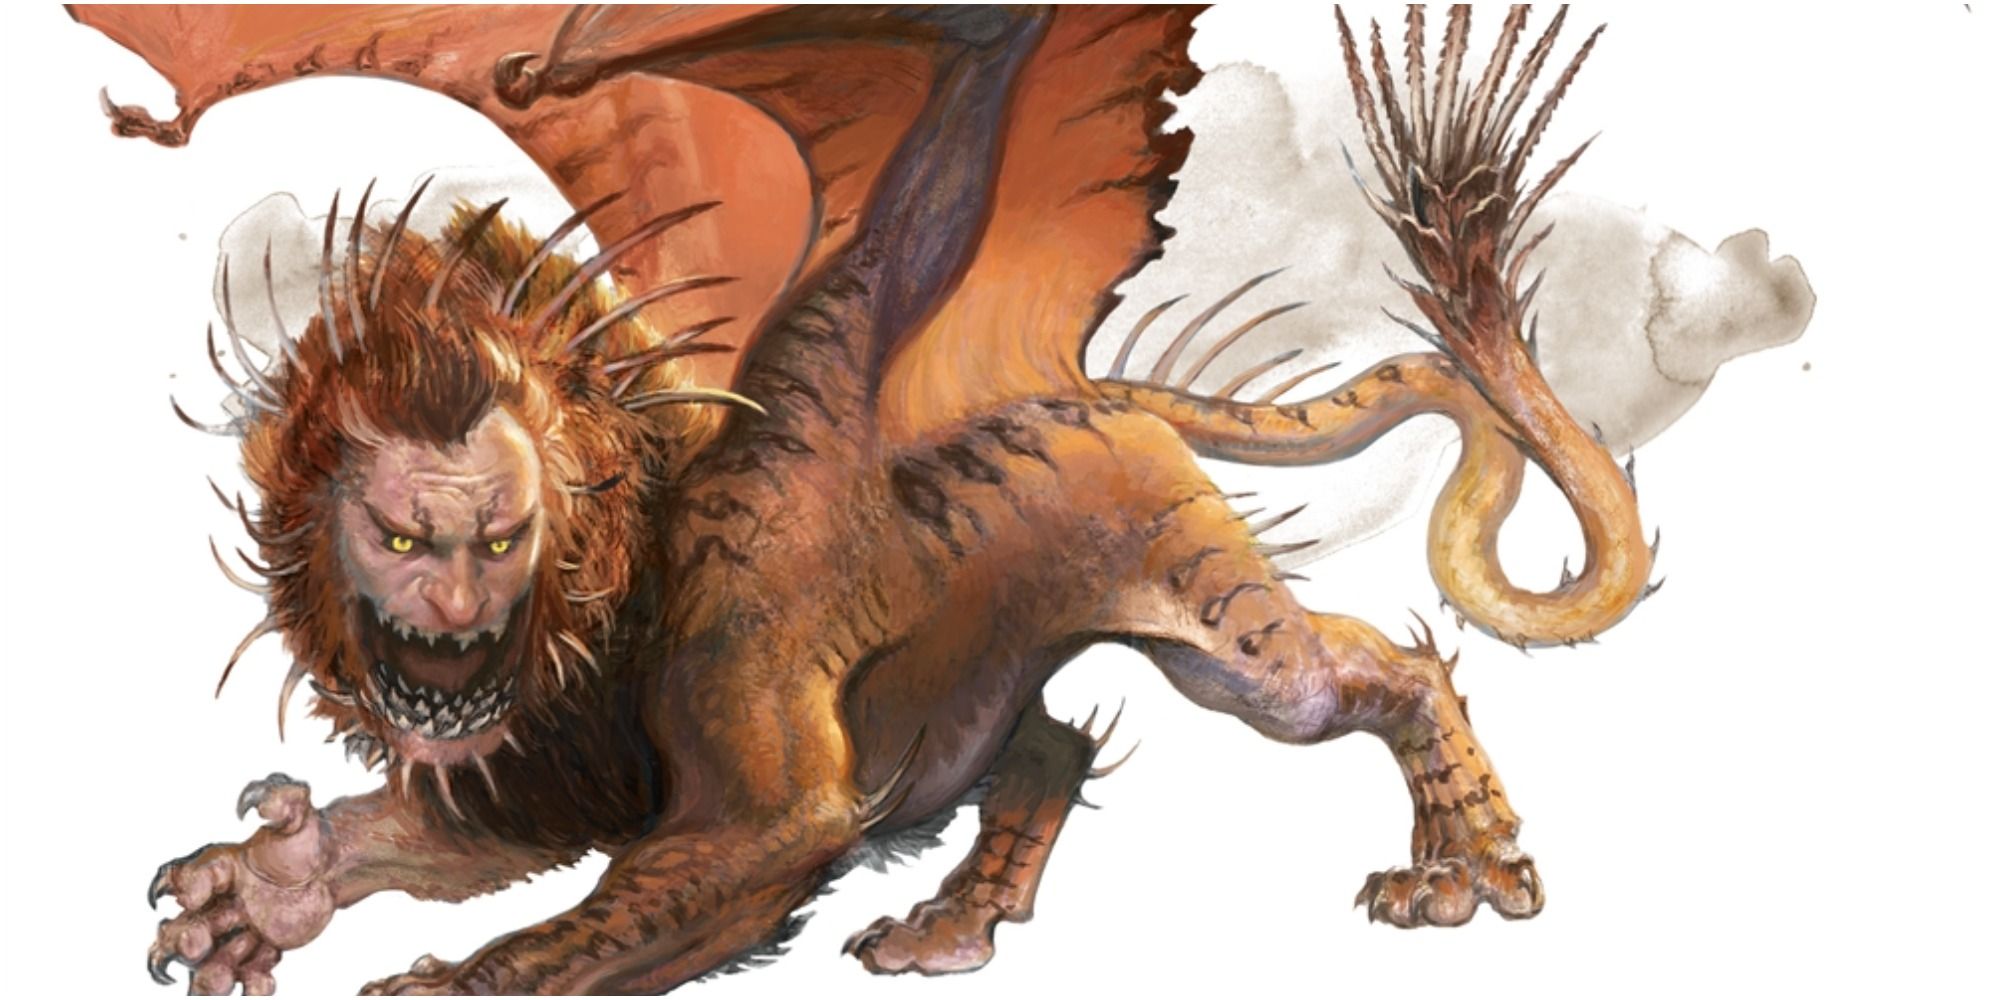 dungeons & dragons art depicting manticore